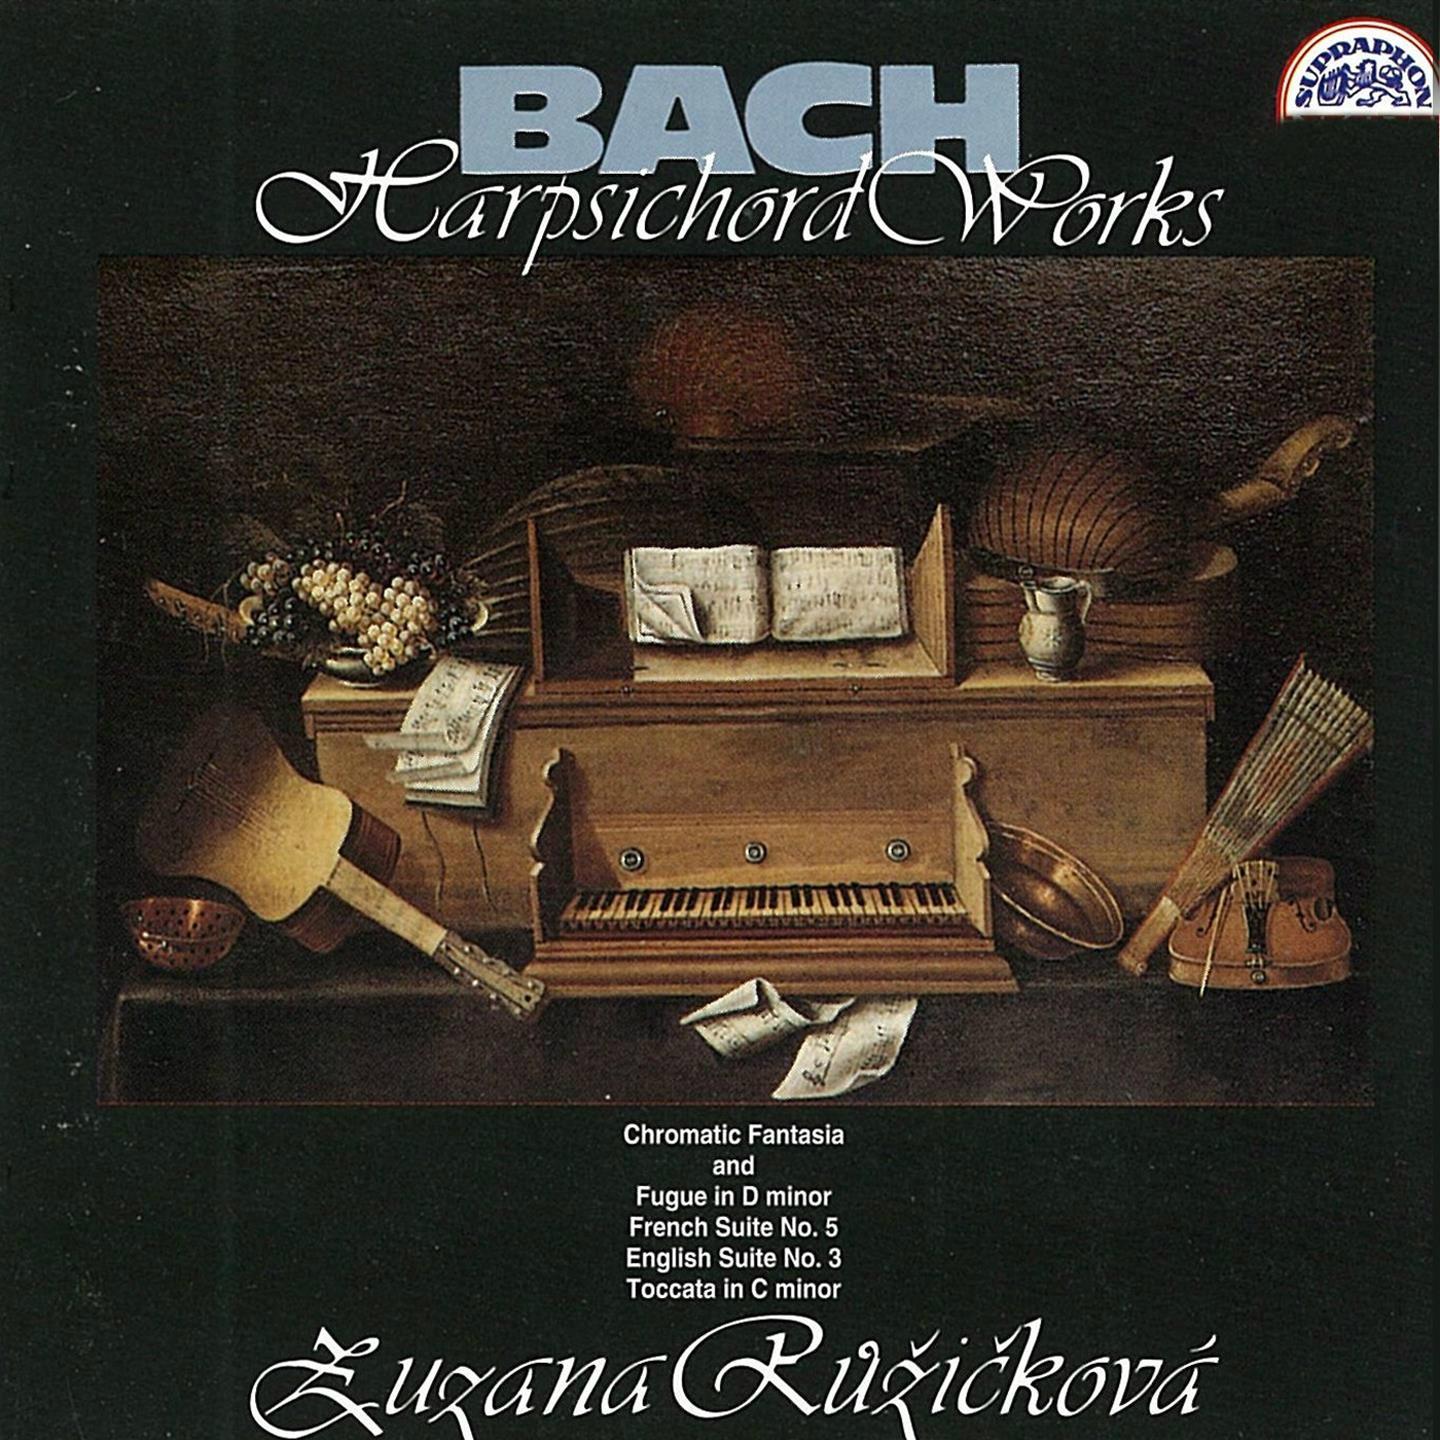 6 French Suites, No. 5 in G Major, BWV 816: III. Sarabande